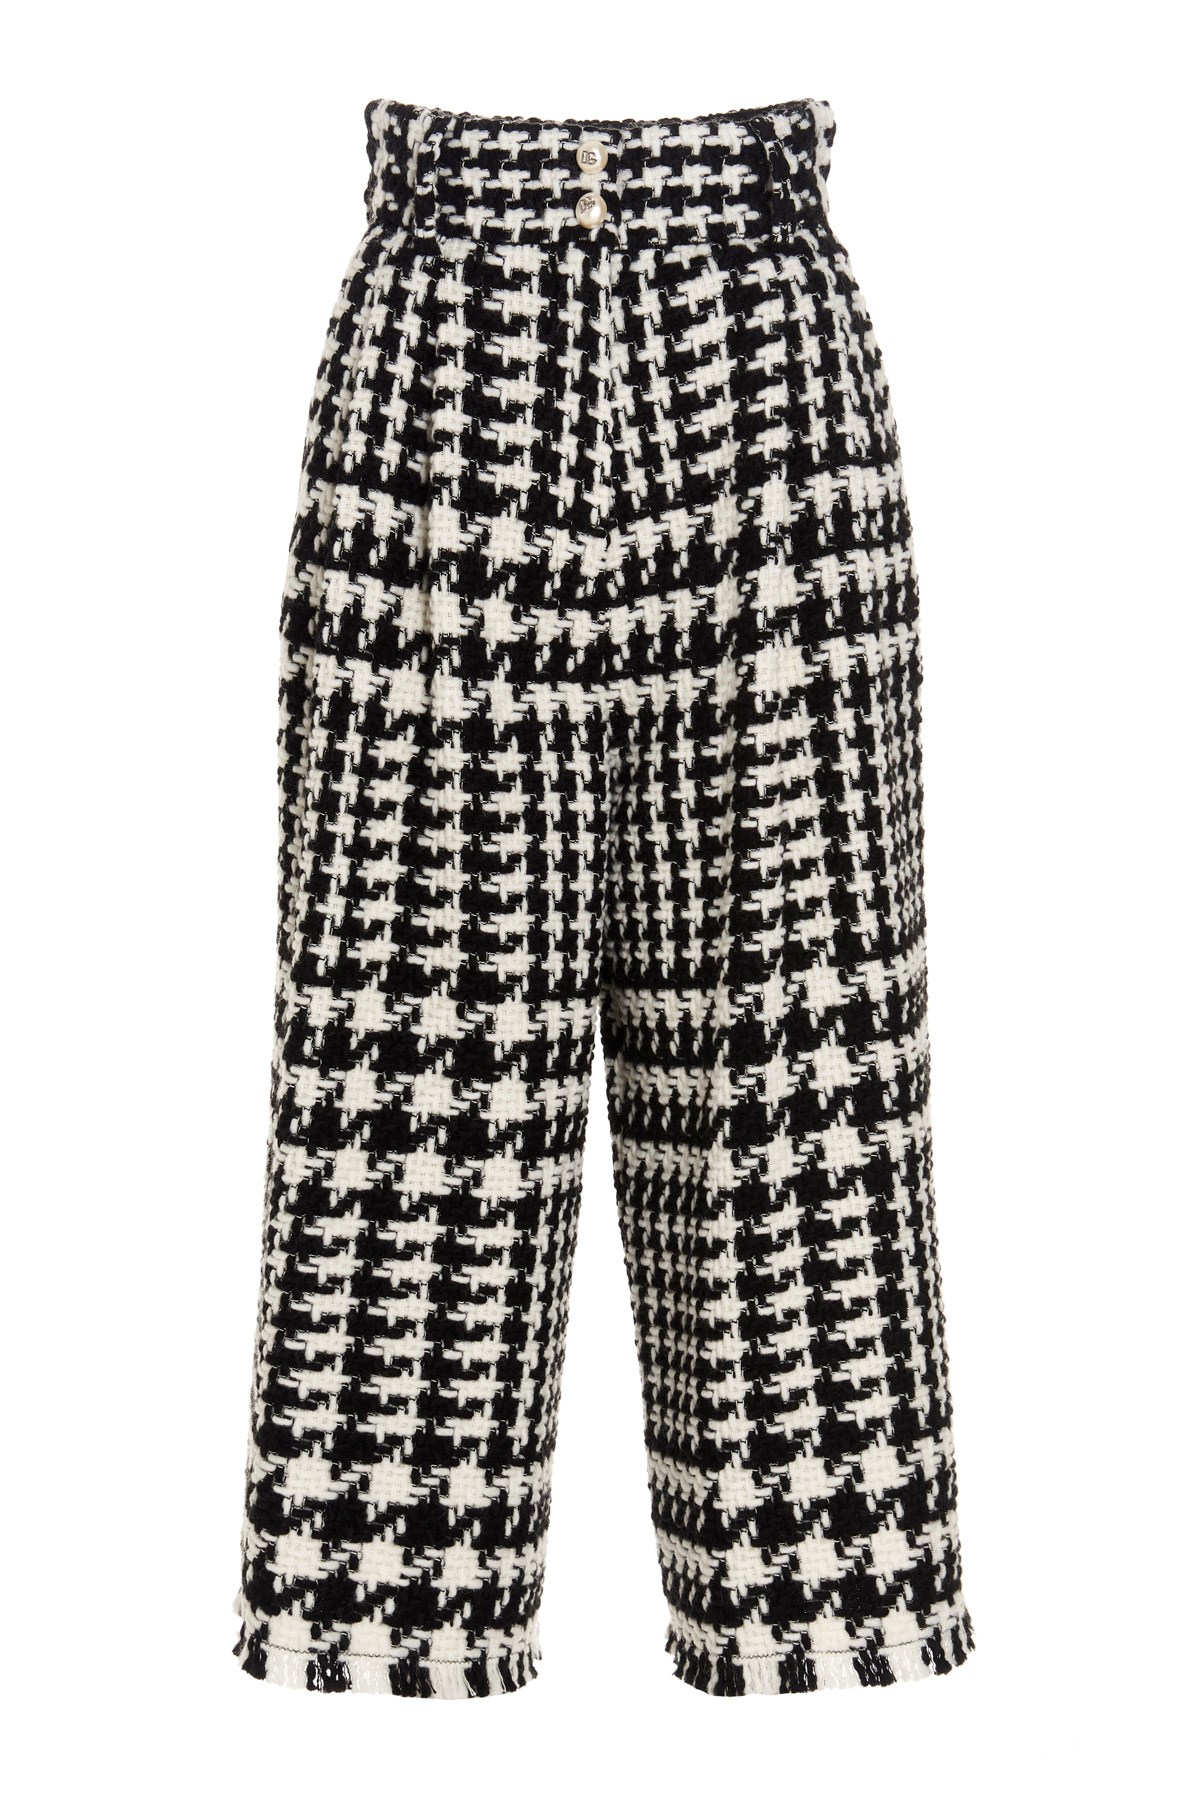 DOLCE & GABBANA Houndstooth Trousers